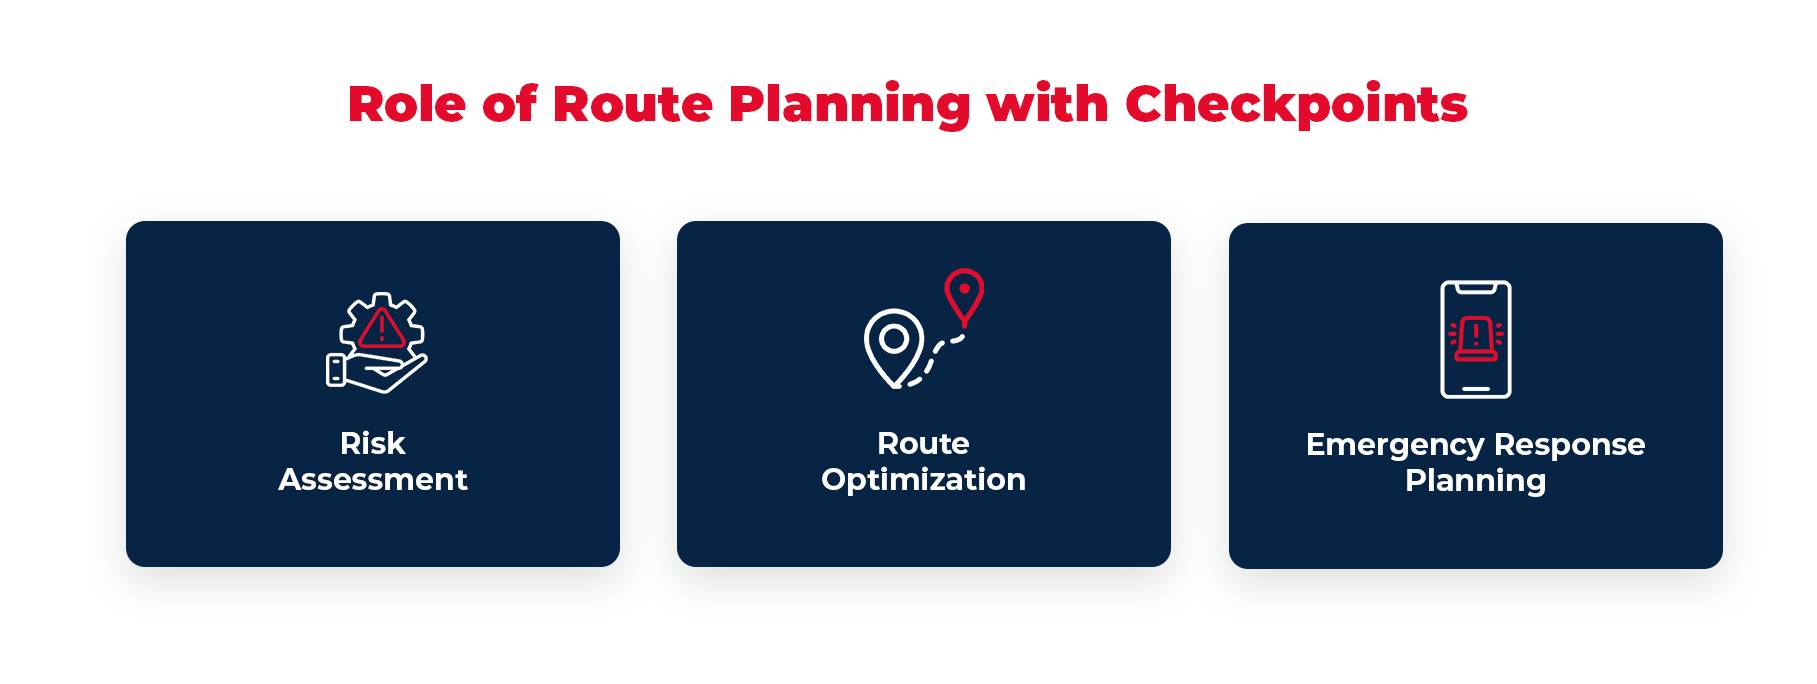 How does checkpoints enhance route planning operations